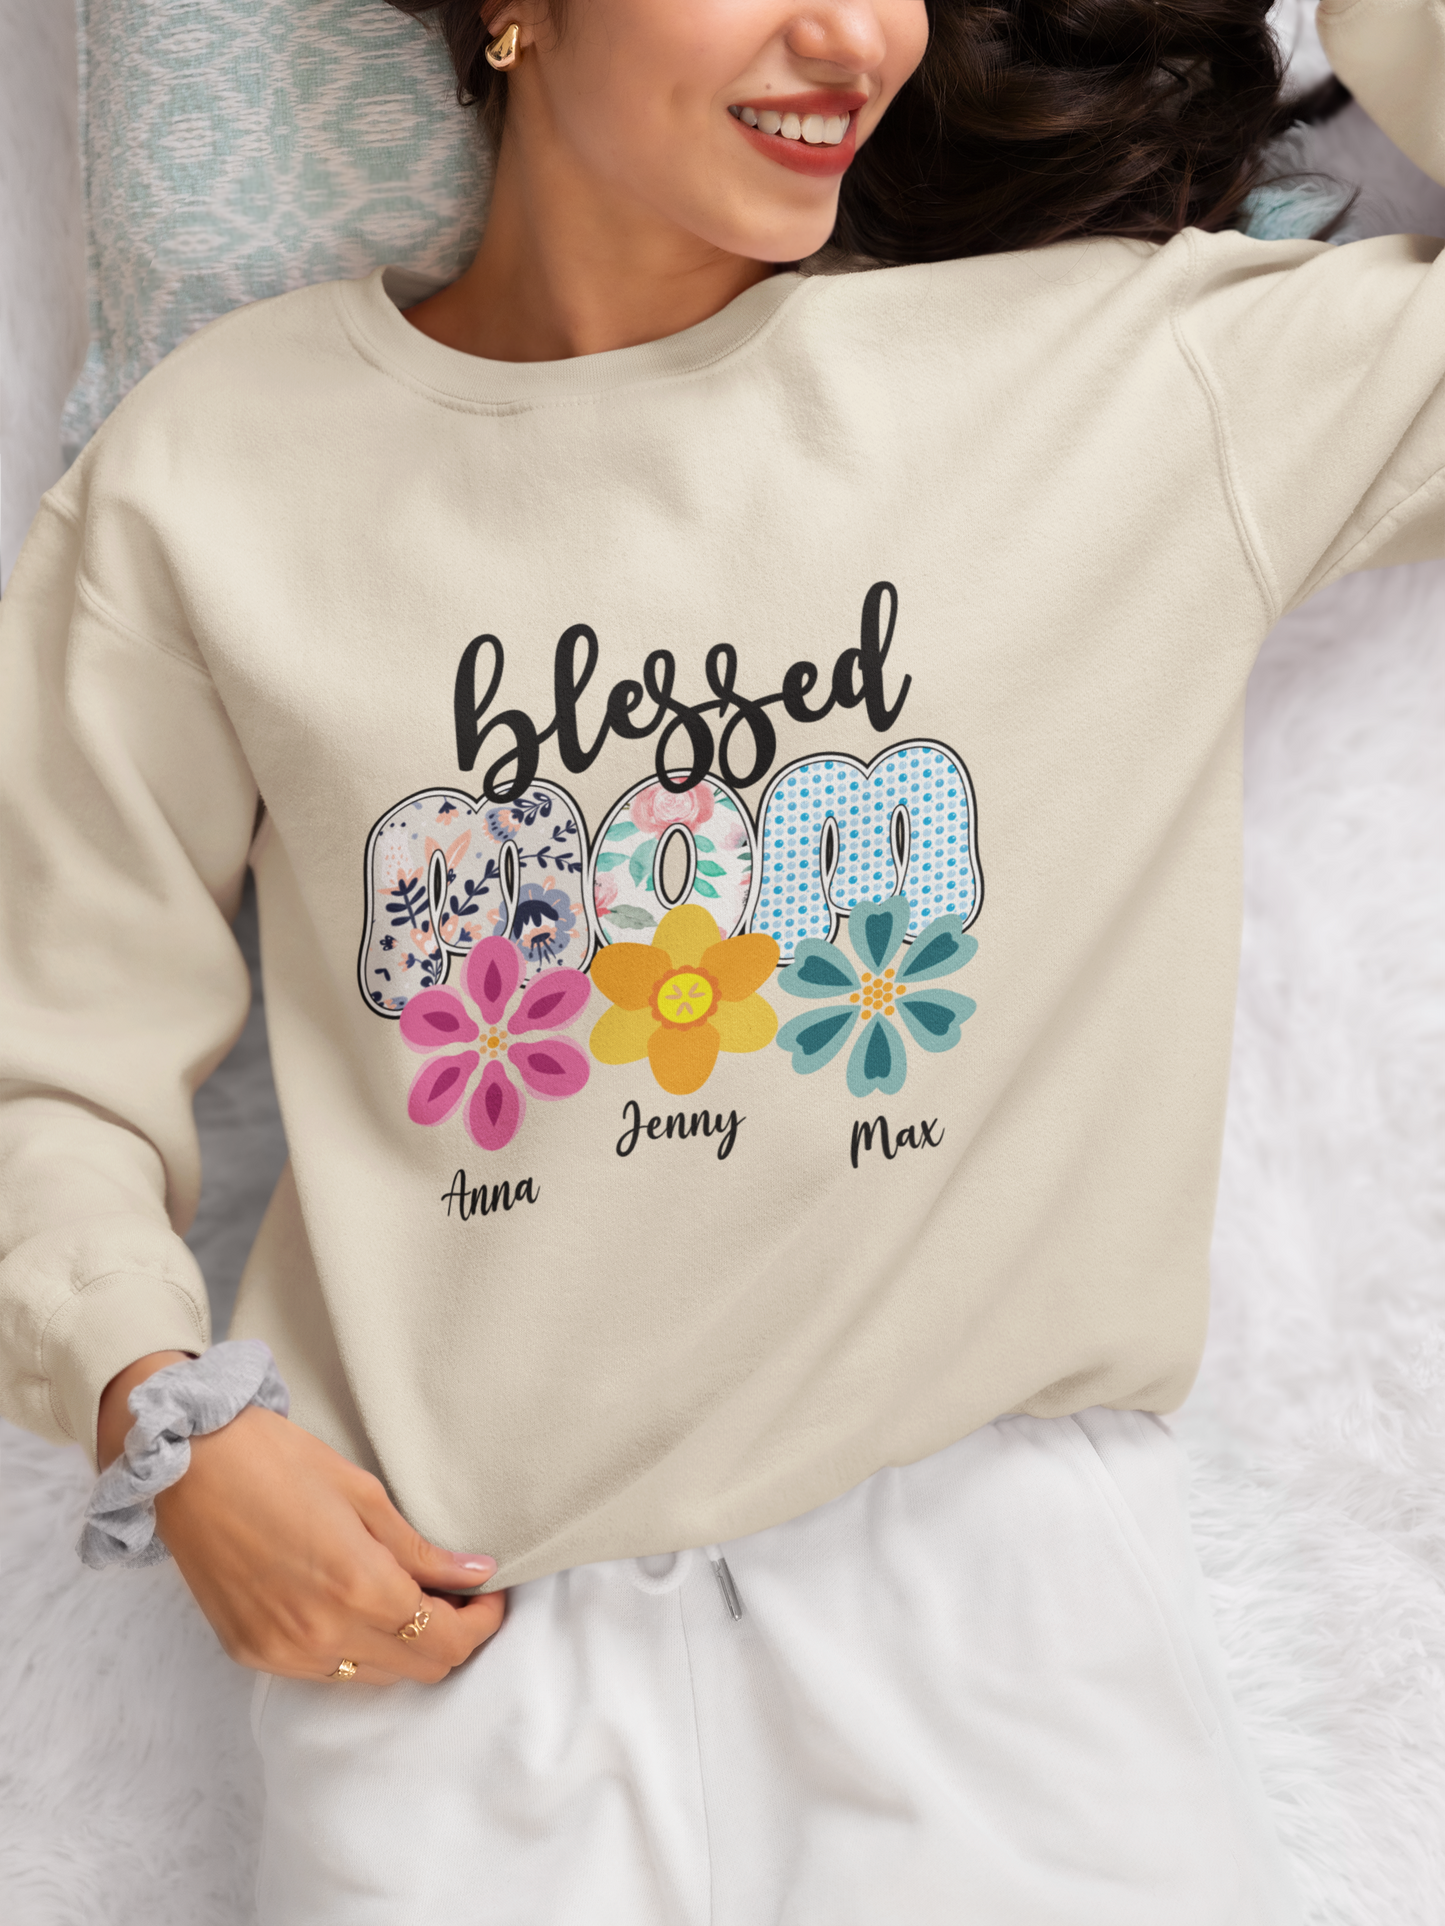 Mother's Day Shirt, Mom's Gift Shirt For Mother's Day, Comfort Color Mama Flowers Shirt, Plant Flowers Mom Shirt, Blessed Mom Shirt, Mother's Day Personalized Name Shirt, Floral Mother's Day Shirt, Personalized Flower Name Shirt, Floral Mama Shirt